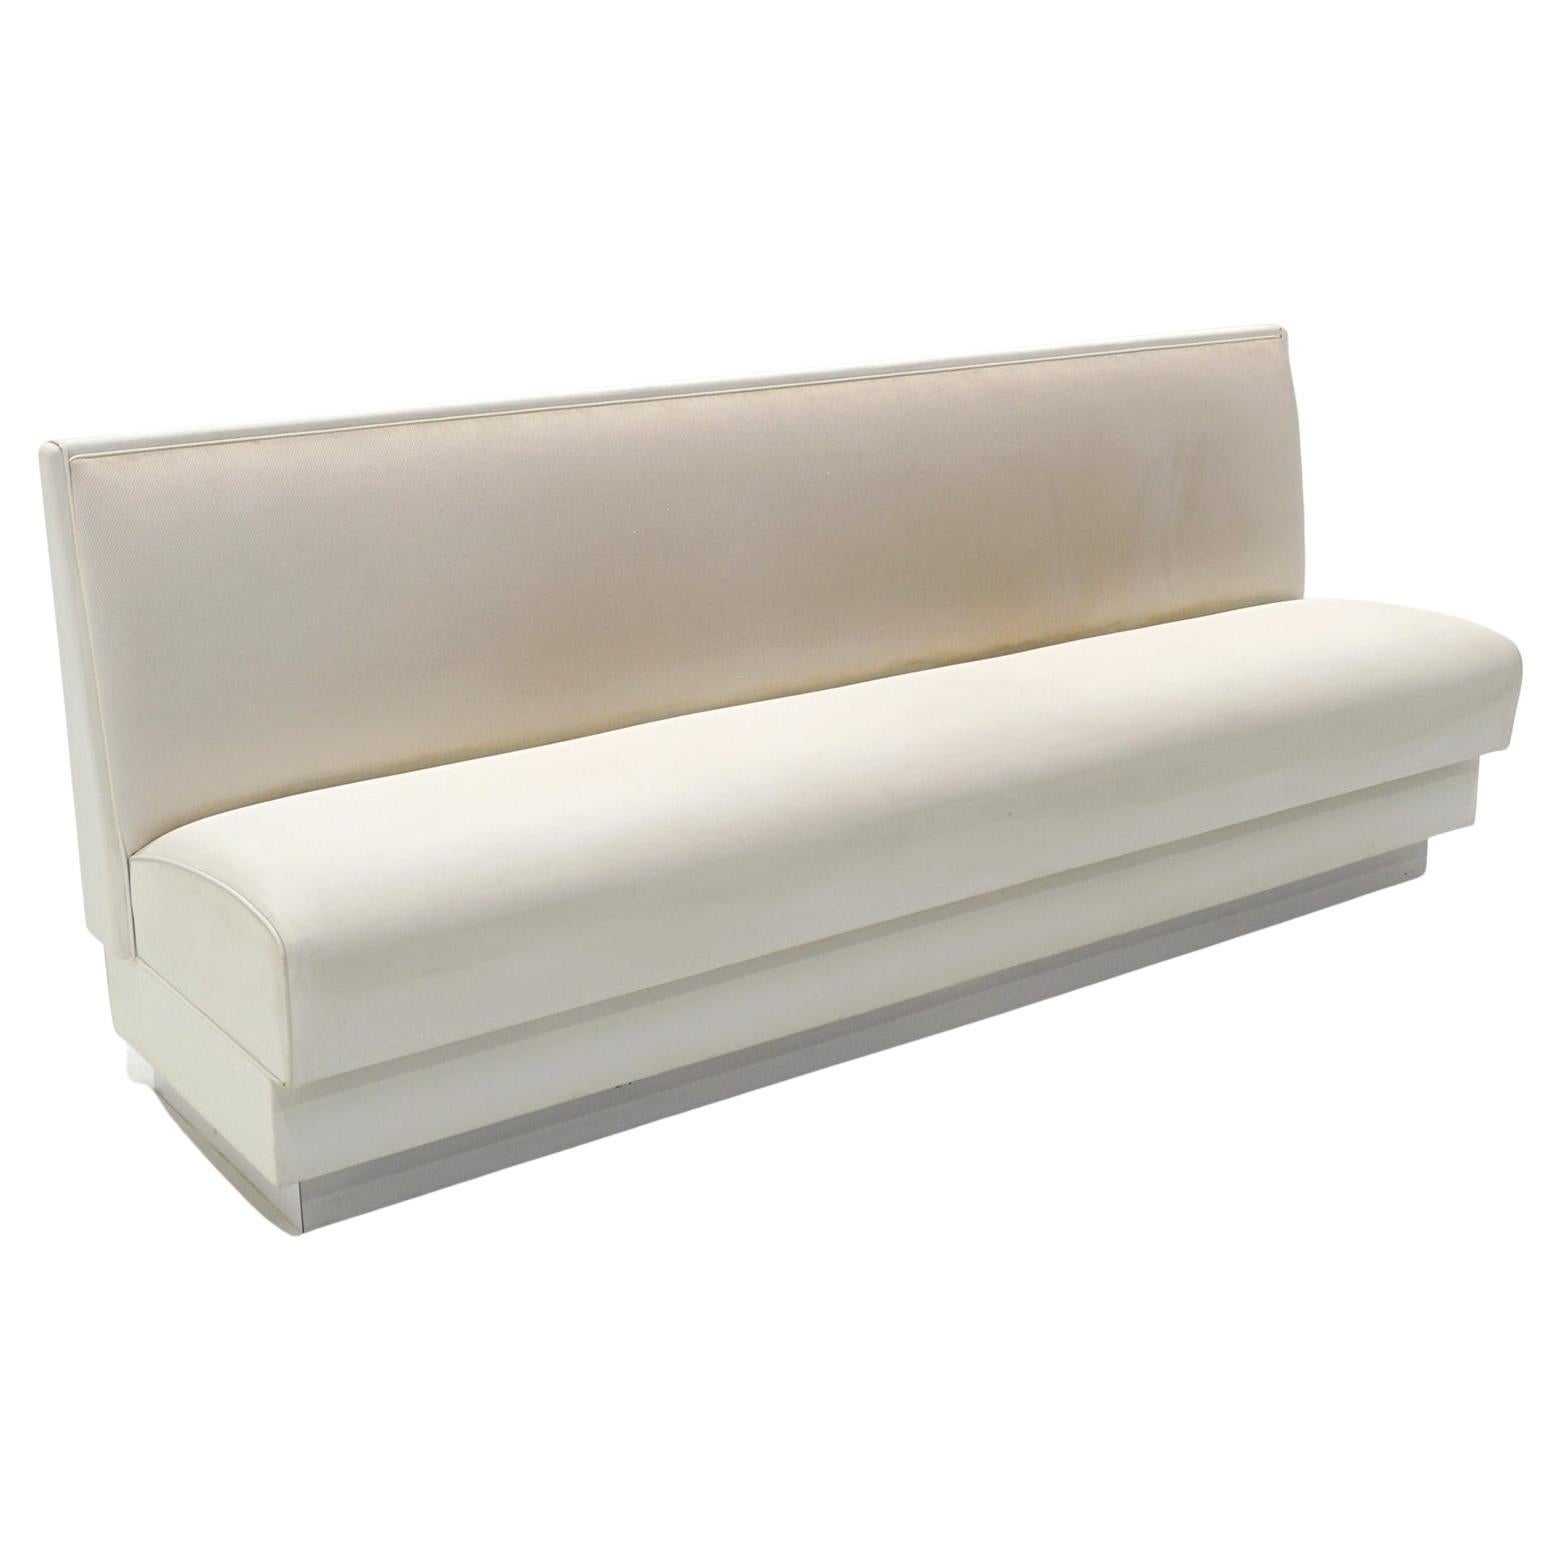 Banquette in Off White Upholstery. Custom built. 7 Feet, 3 inches Long.